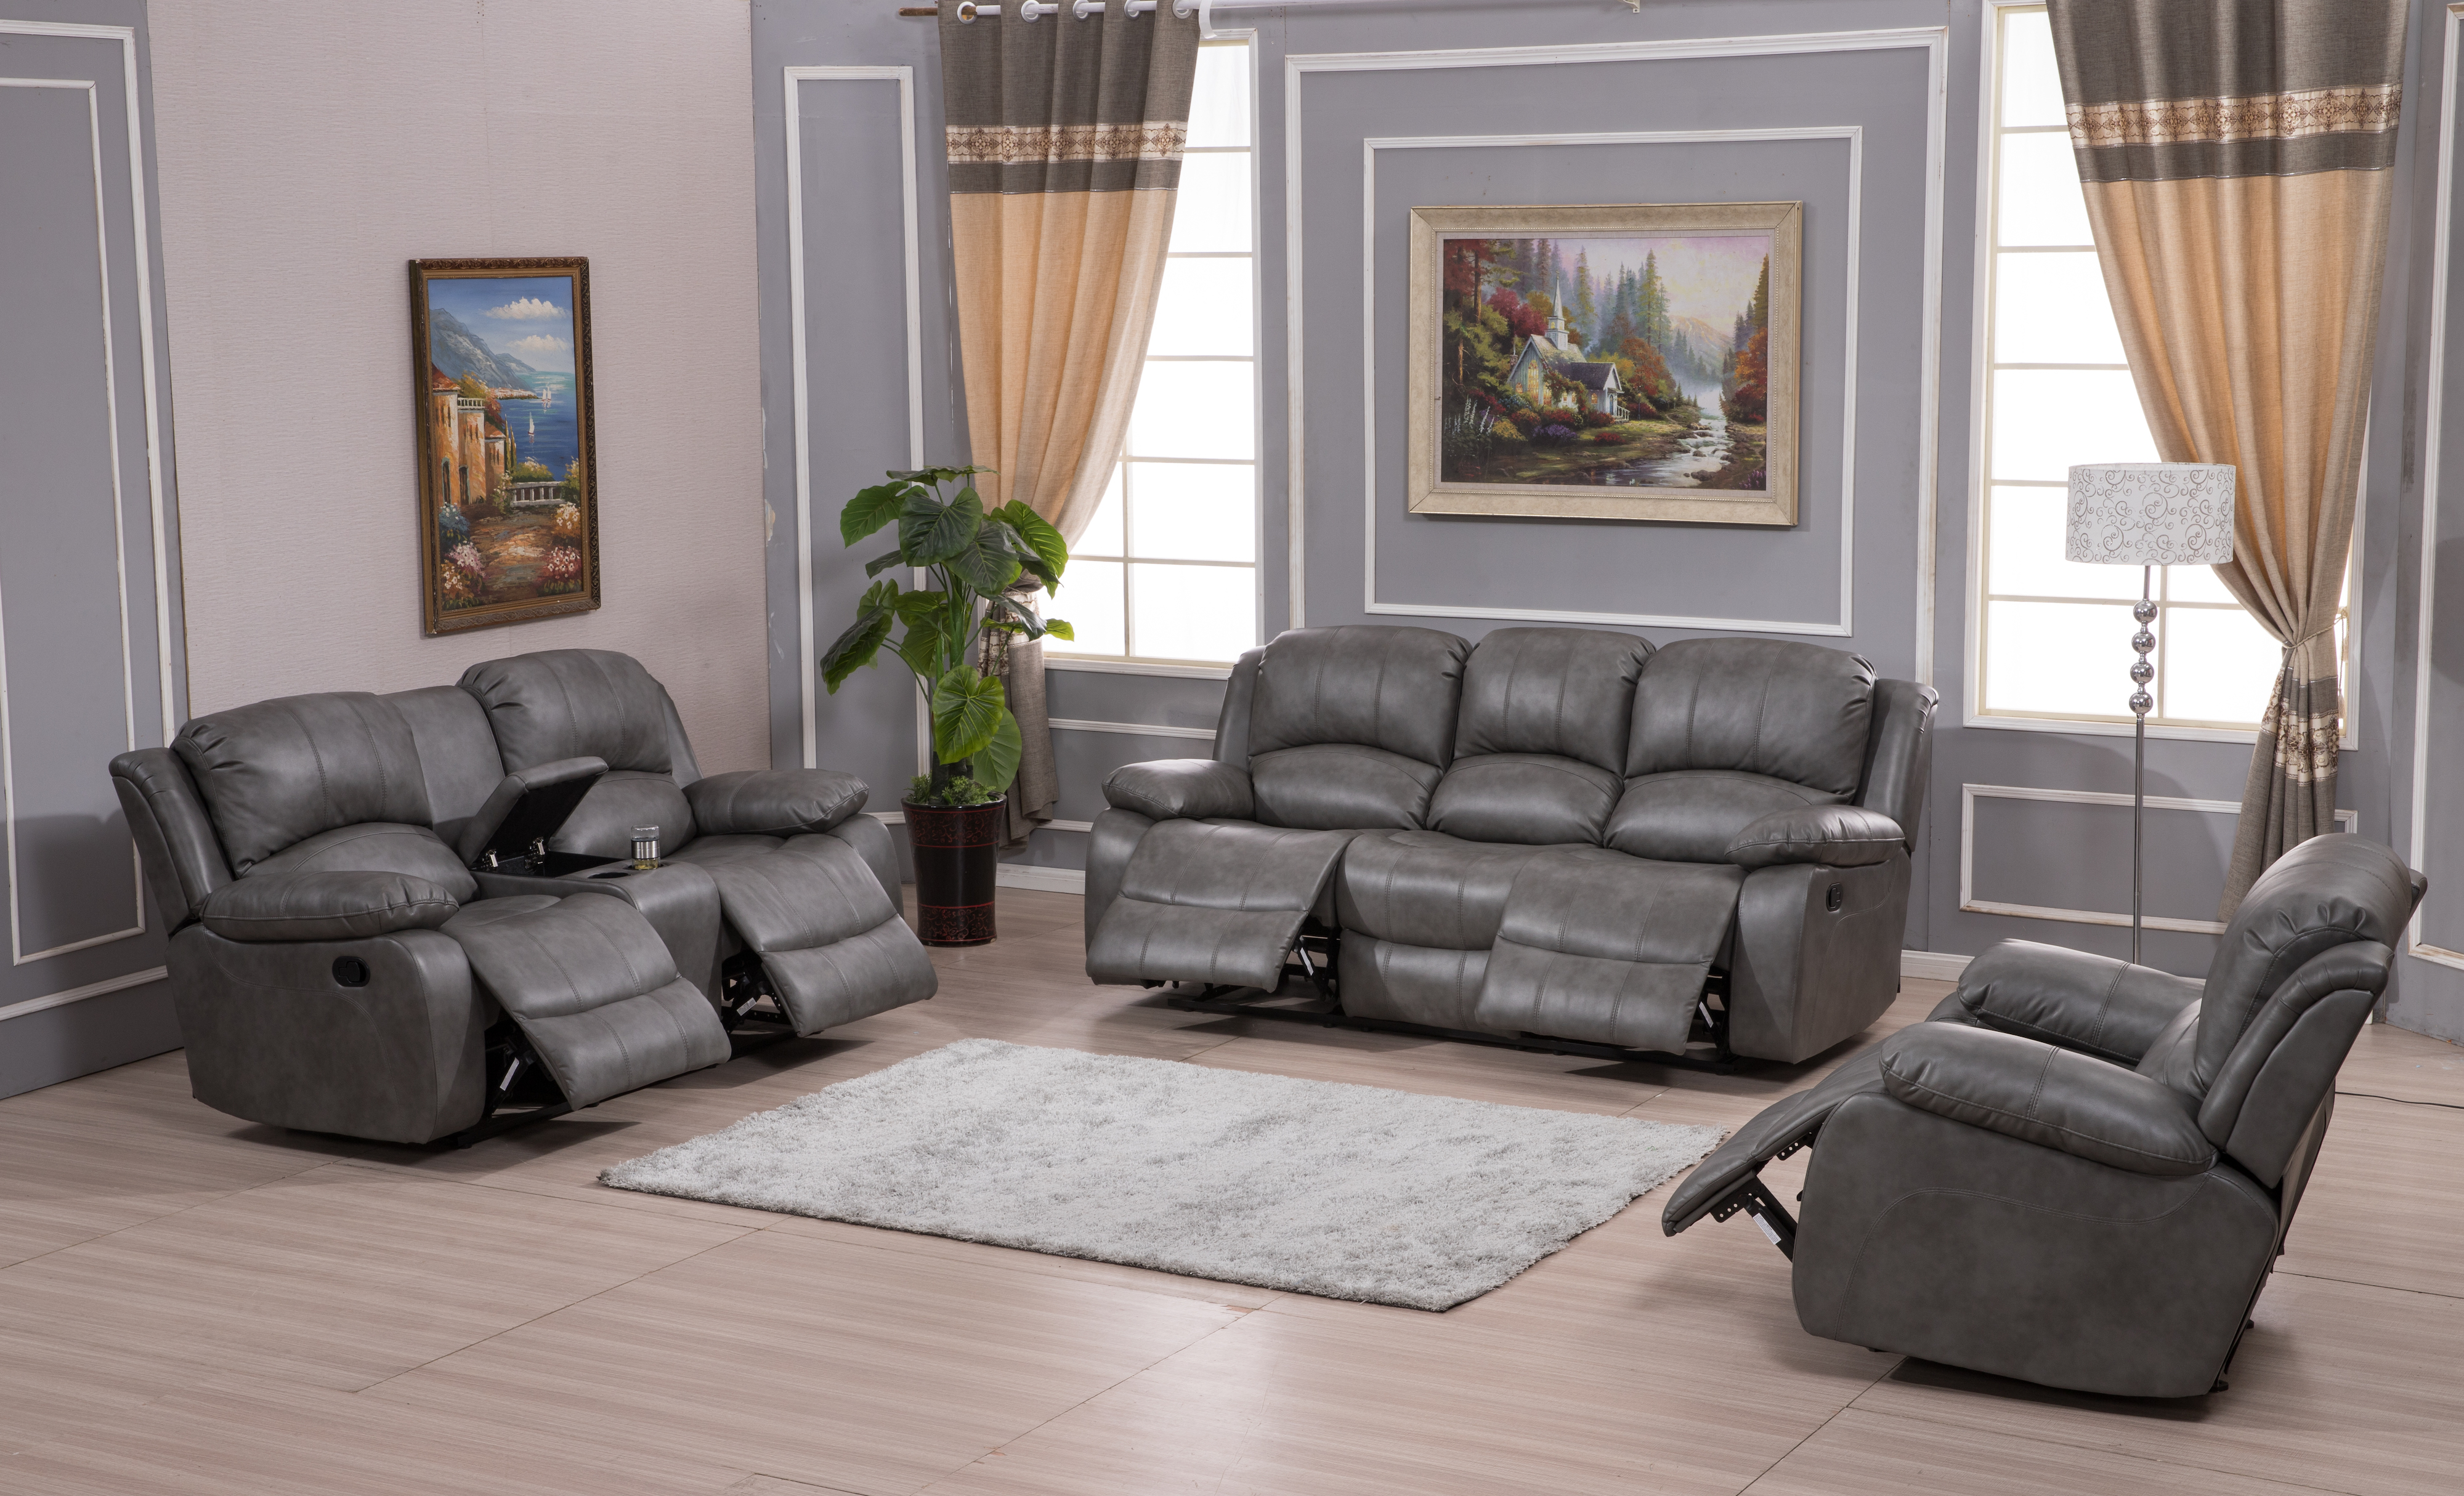 Pc Bonded Leather Recliner Set, Gray Leather Reclining Living Room Sets